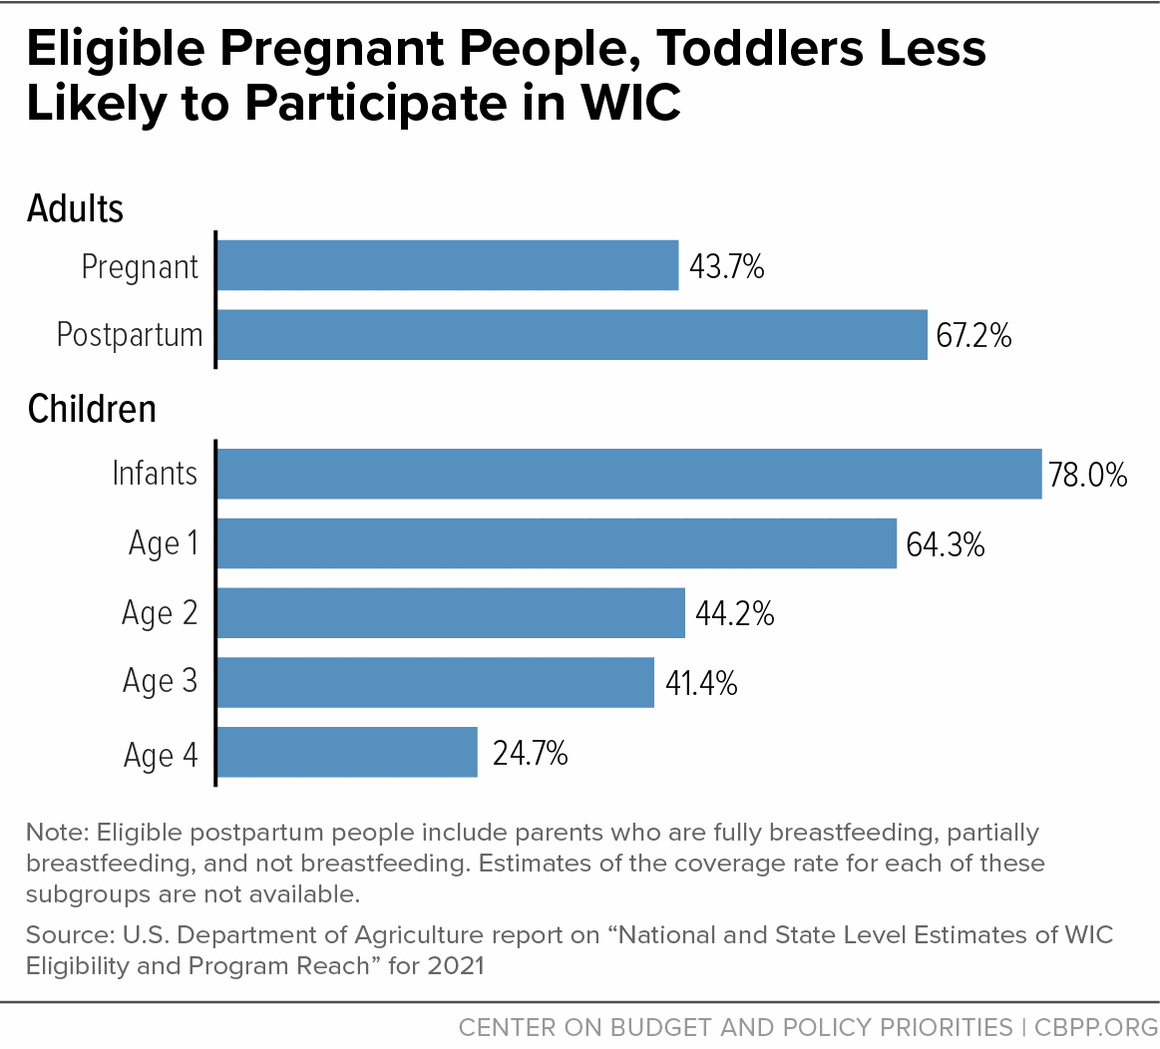 Eligible Pregnant People, Toddlers Less Likely to Participate in WIC